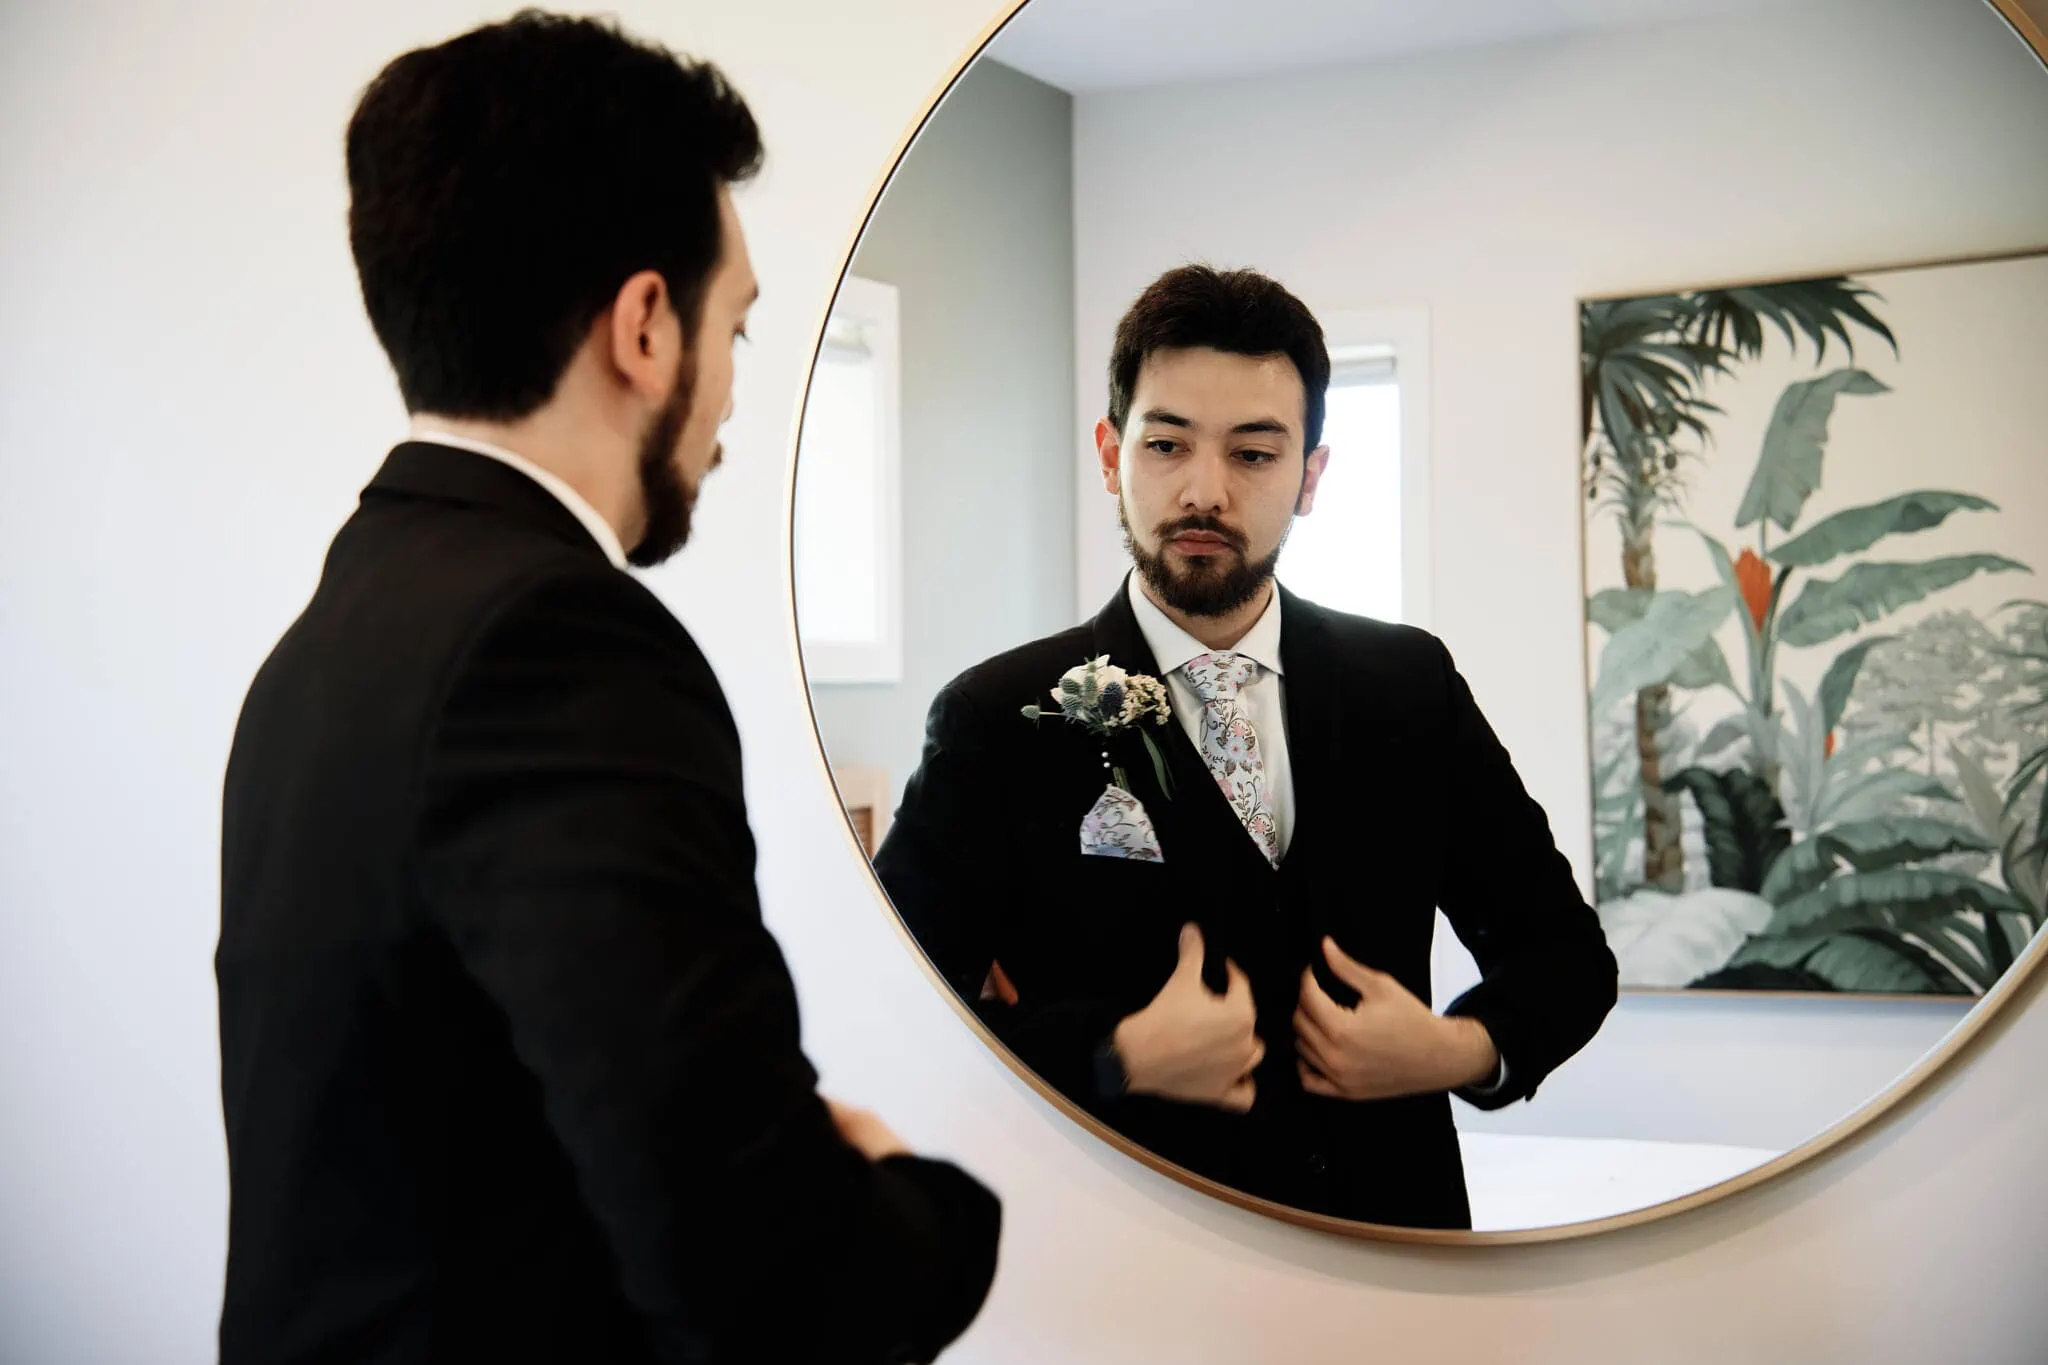 Carlos, in a suit, is putting on his tie in front of a mirror for his intimate Cecil Peak Heli Elopement Wedding with Wanzhu.